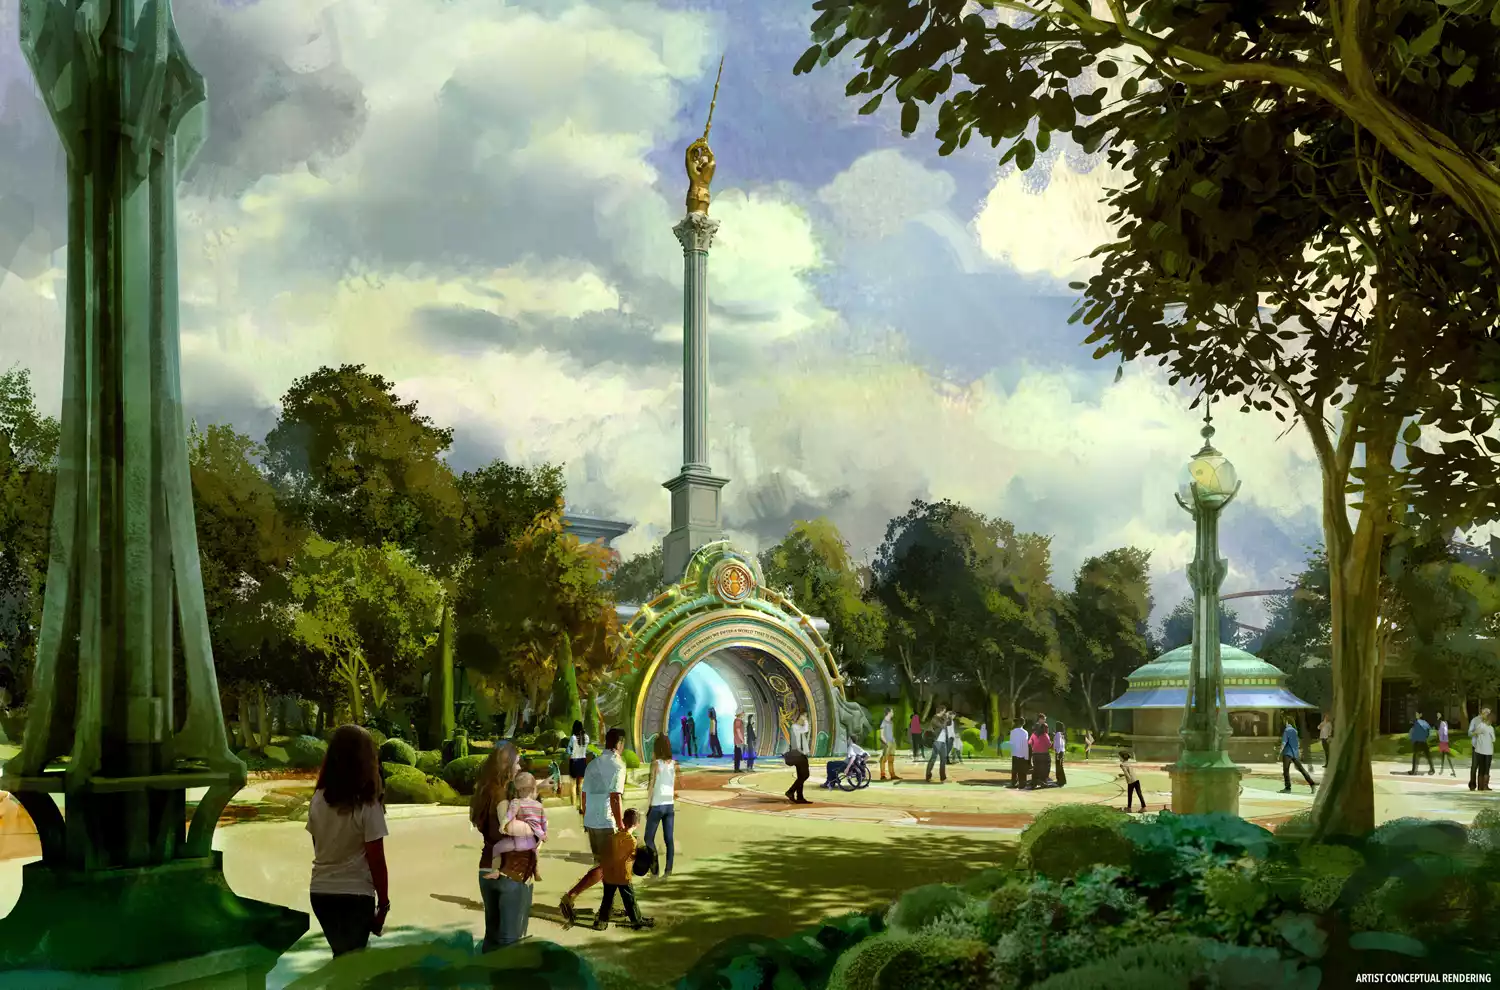 Concept art shows a rounded, portal-style entrance topped with a tall pillar bearing a golden figure holding a wand aloft.